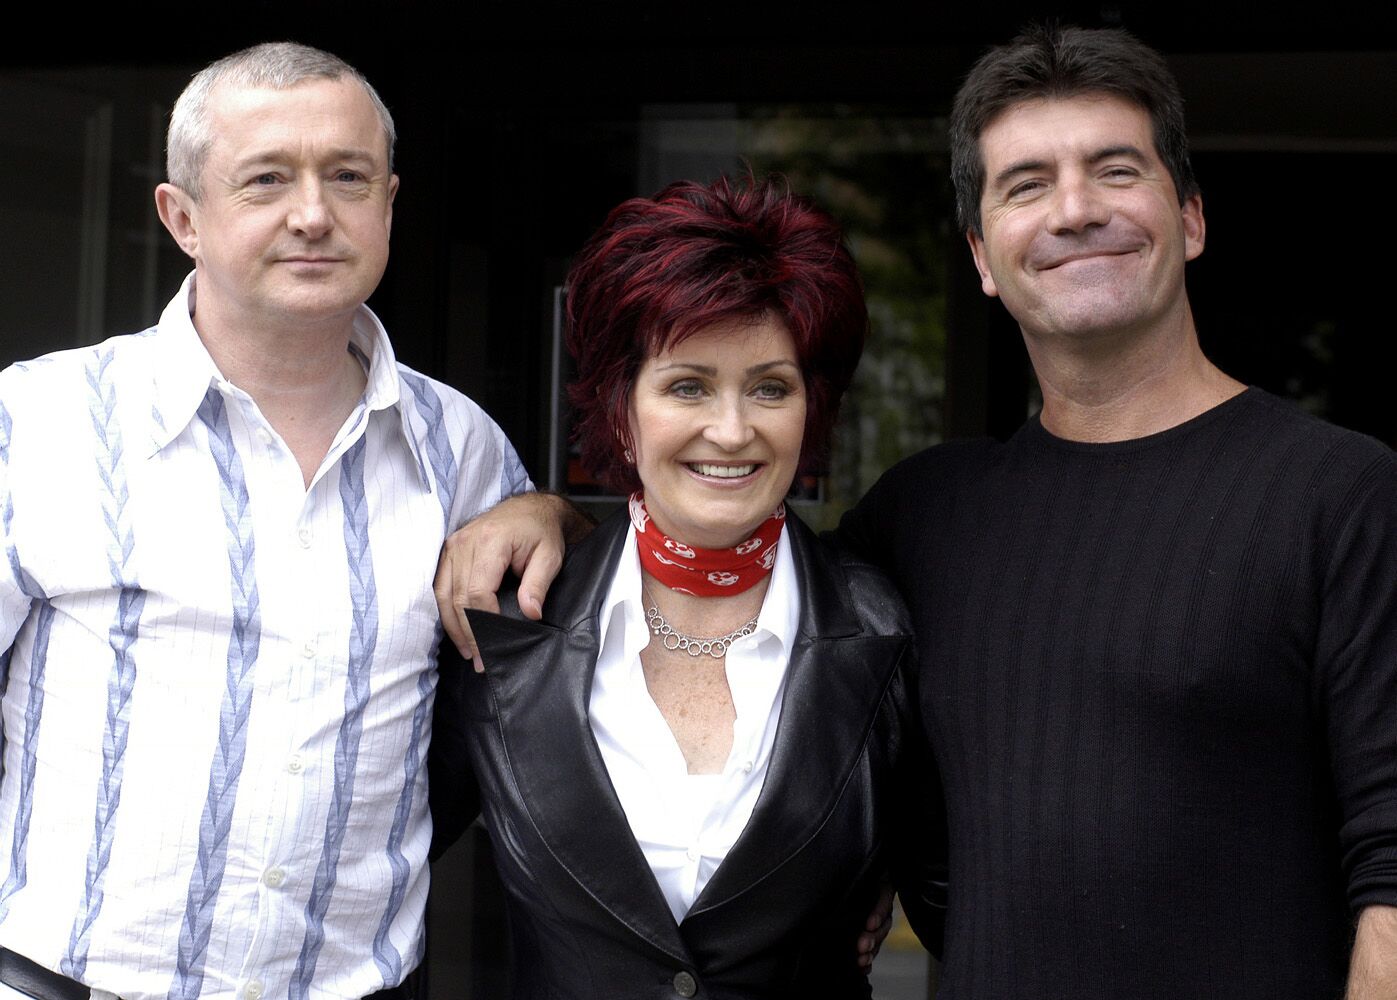 Louis Walsh, Sharon Osbourne and Simon Cowell on set of the TV show "X Factor" in 2004 | Source: Getty Images